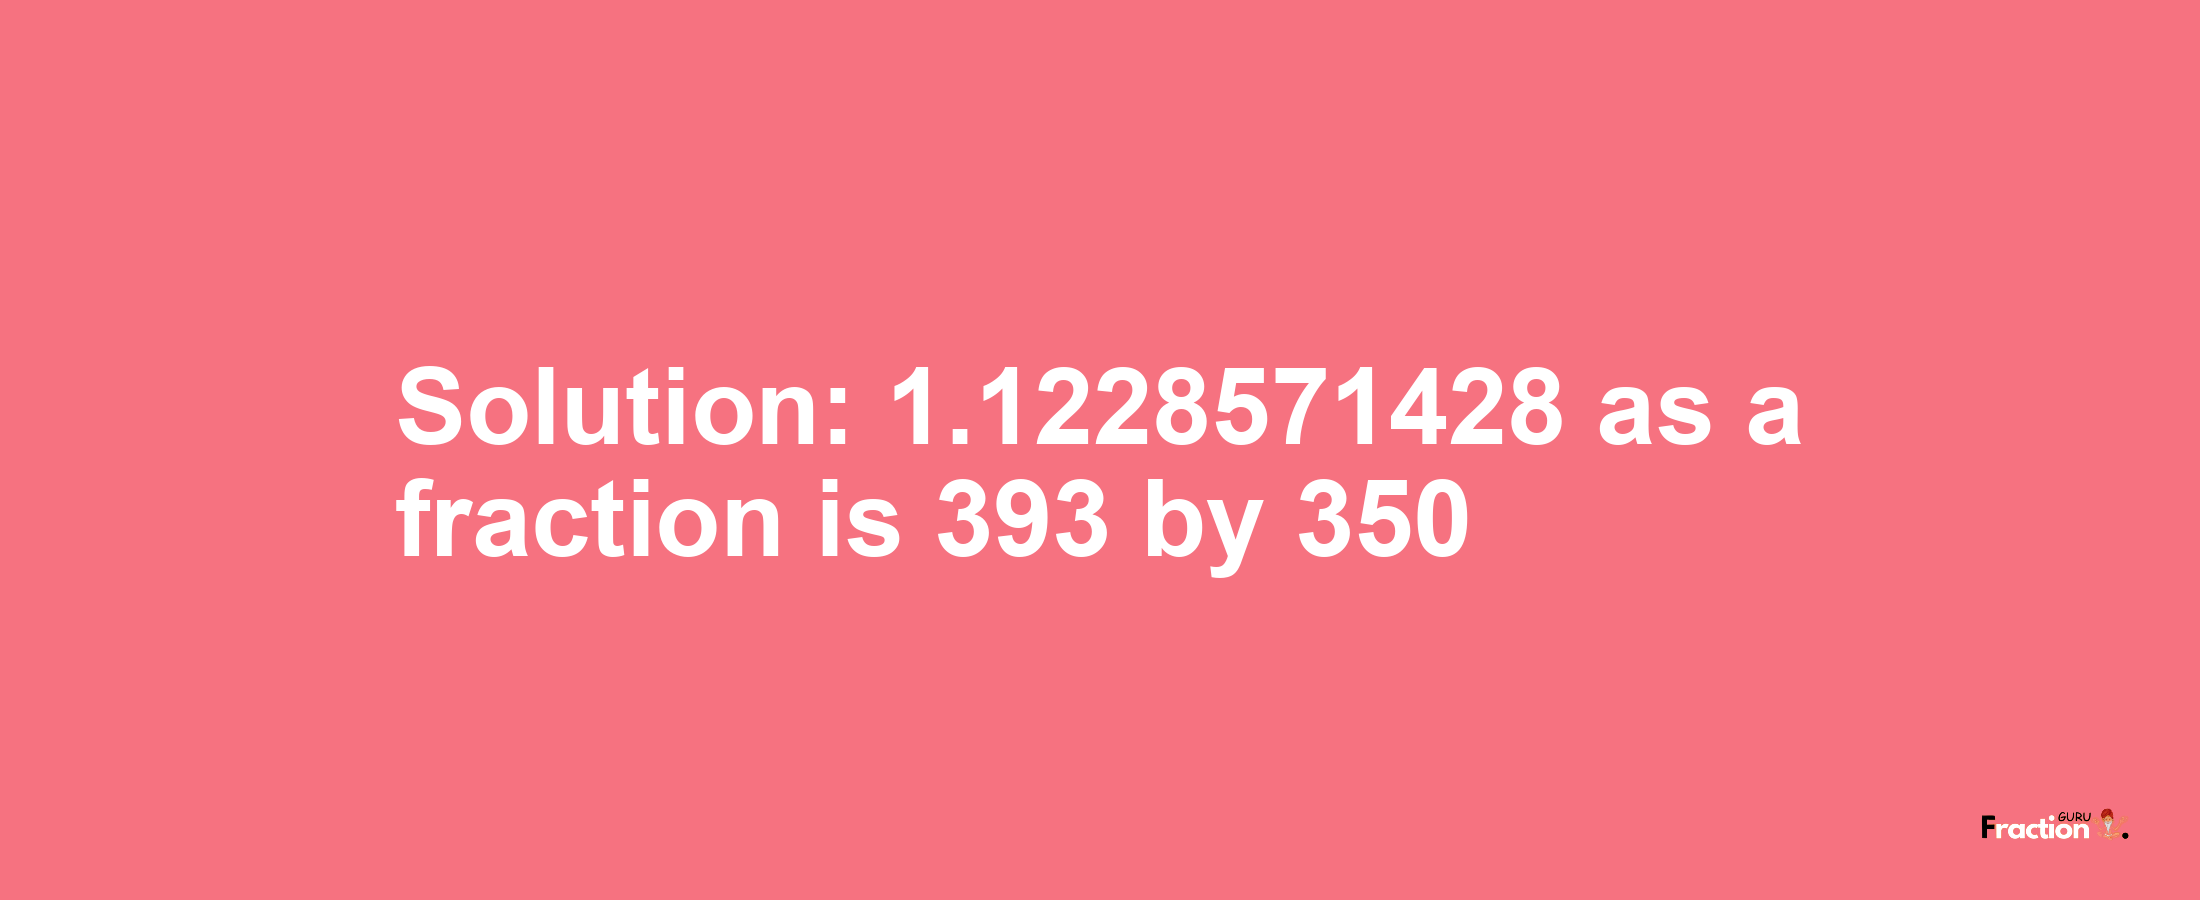 Solution:1.1228571428 as a fraction is 393/350